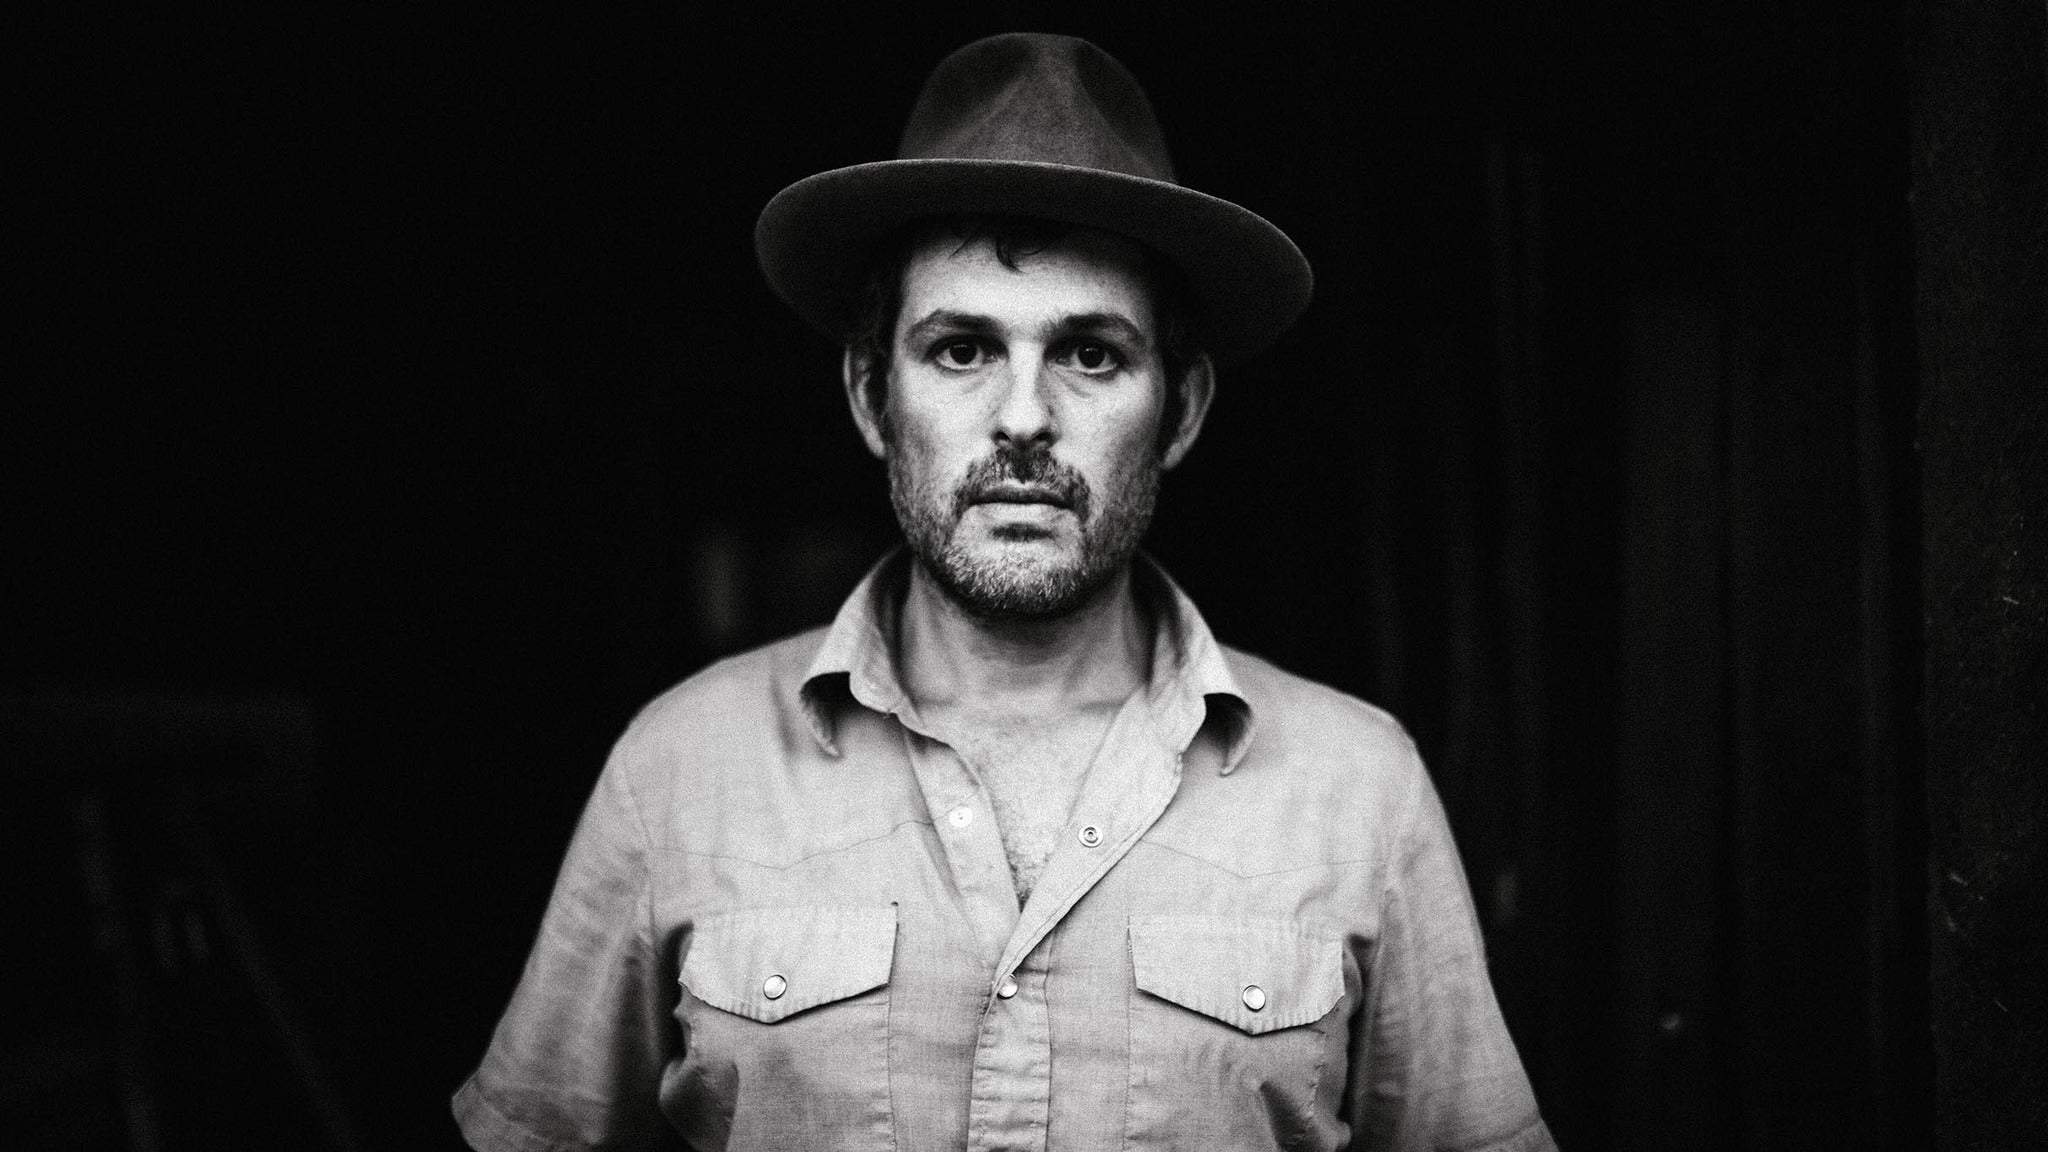 Image used with permission from Ticketmaster | Gregory Alan Isakov tickets